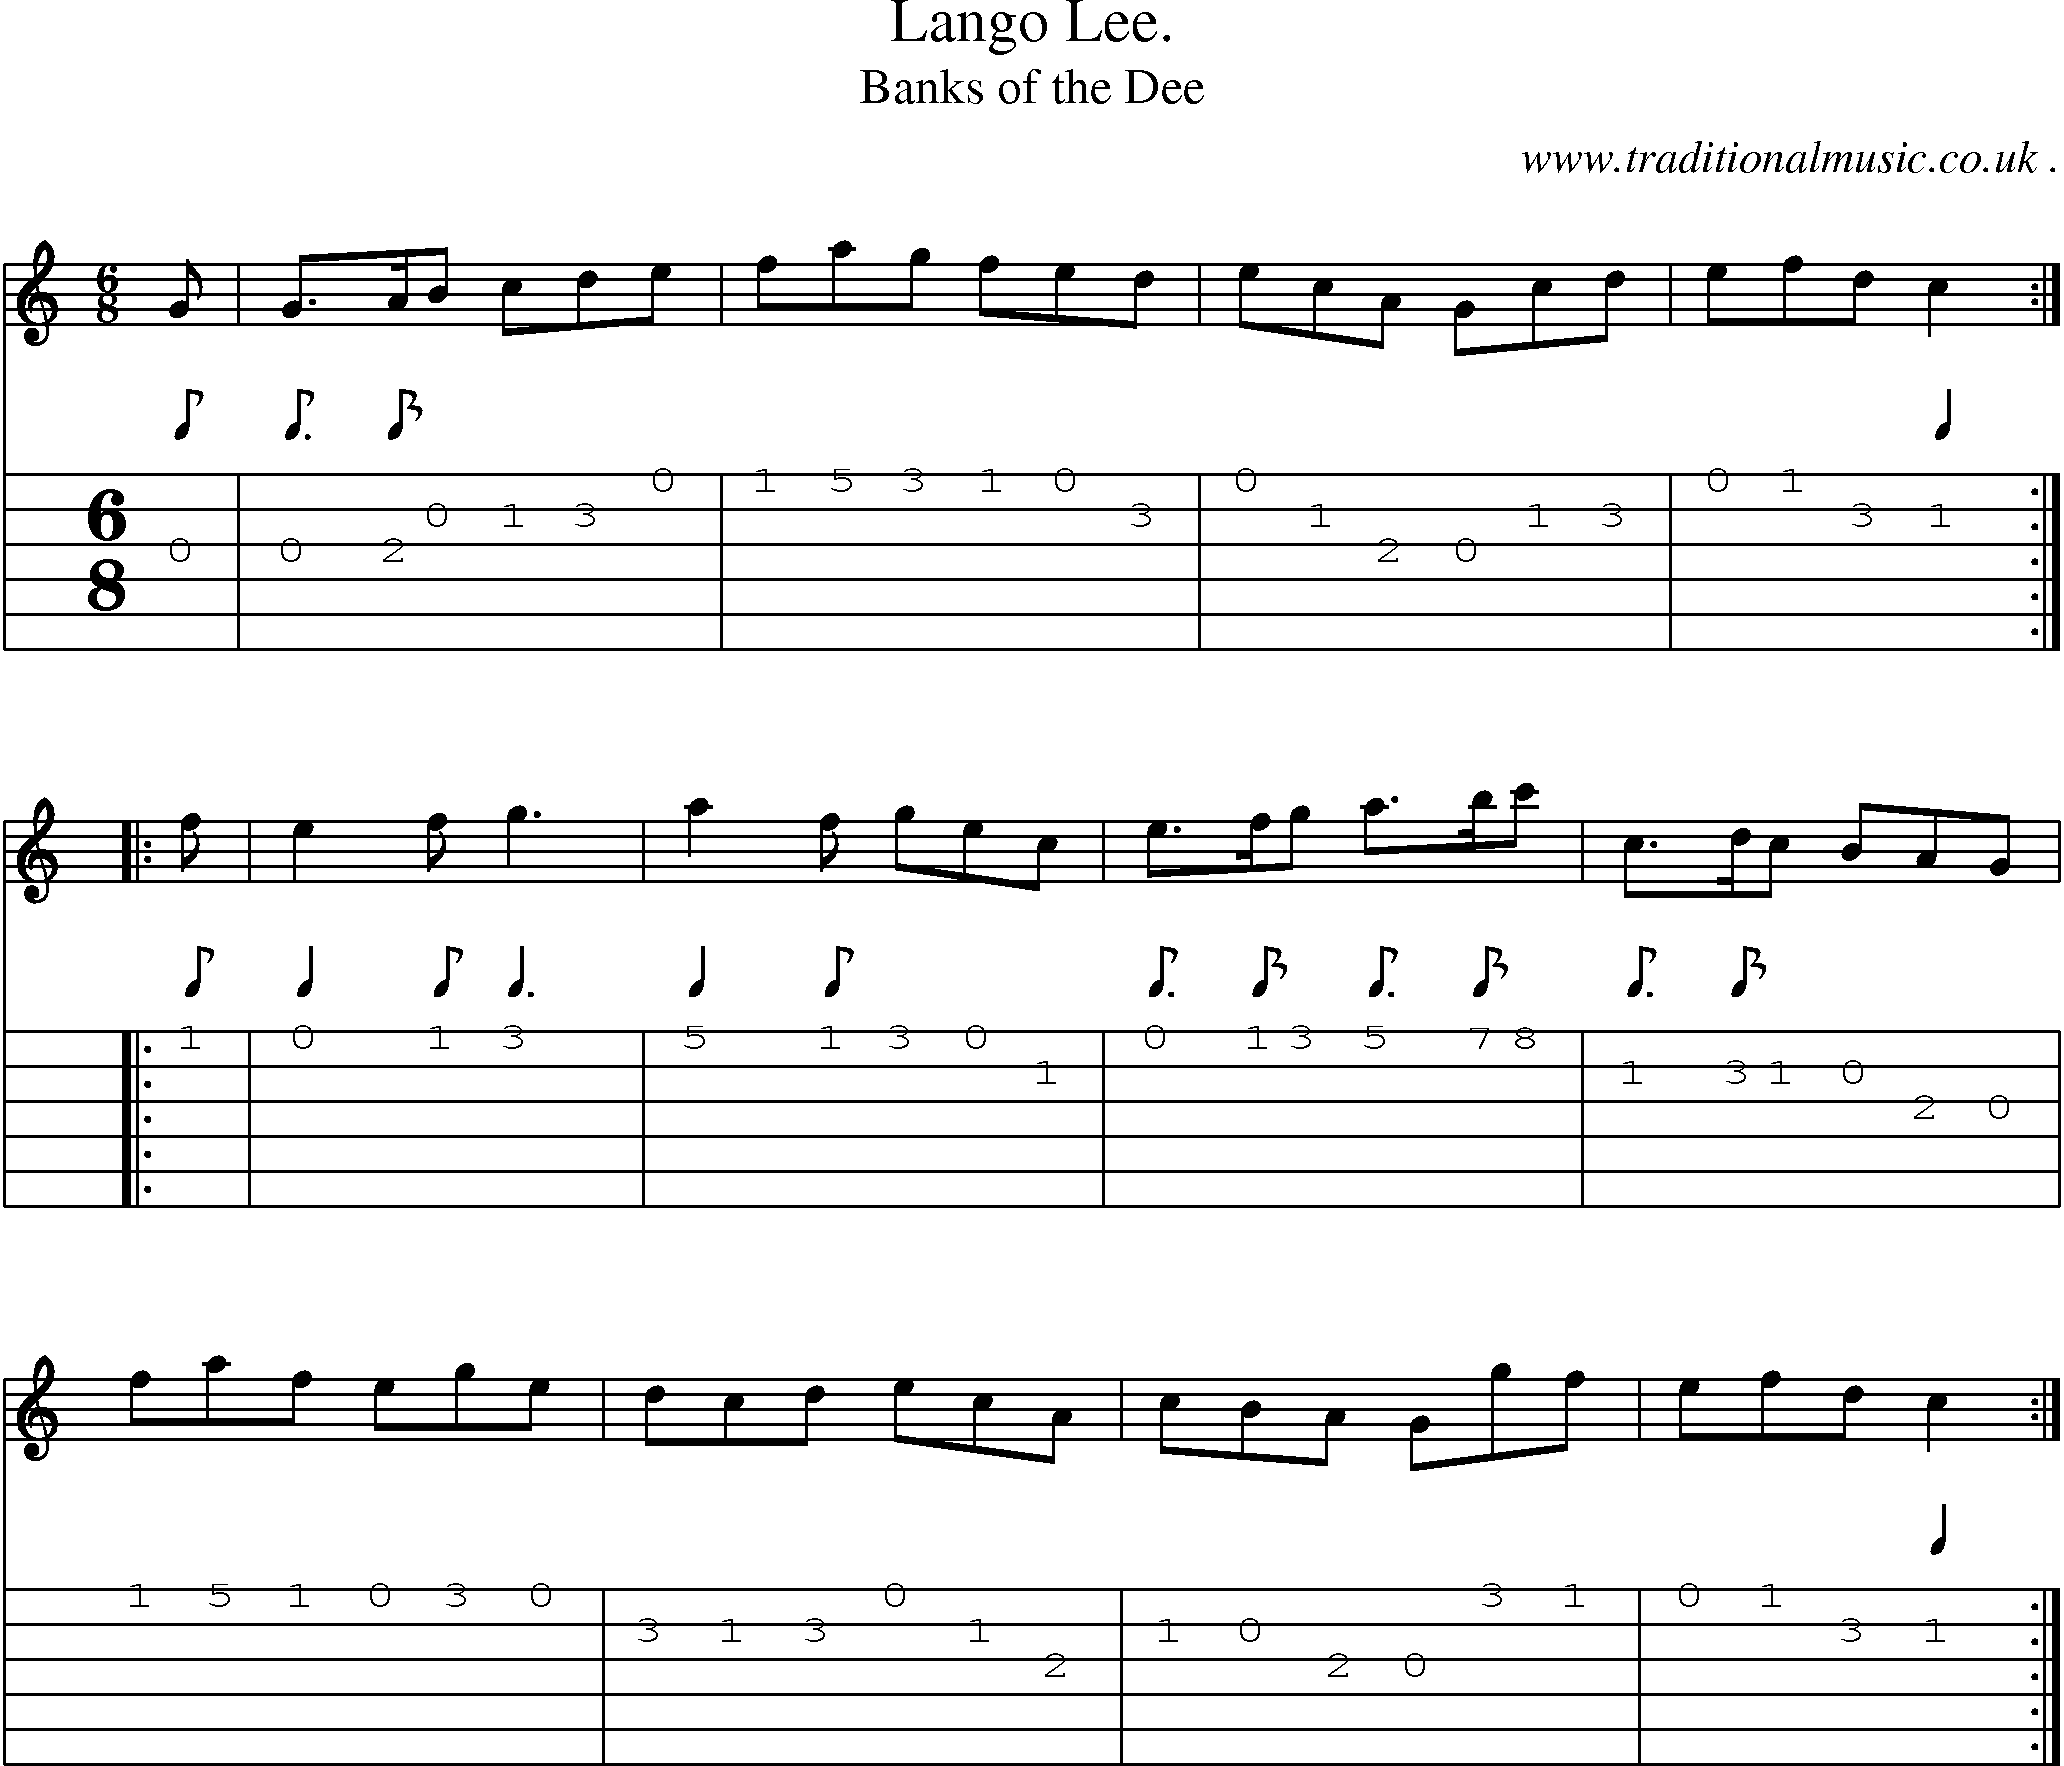 Sheet-Music and Guitar Tabs for Lango Lee 